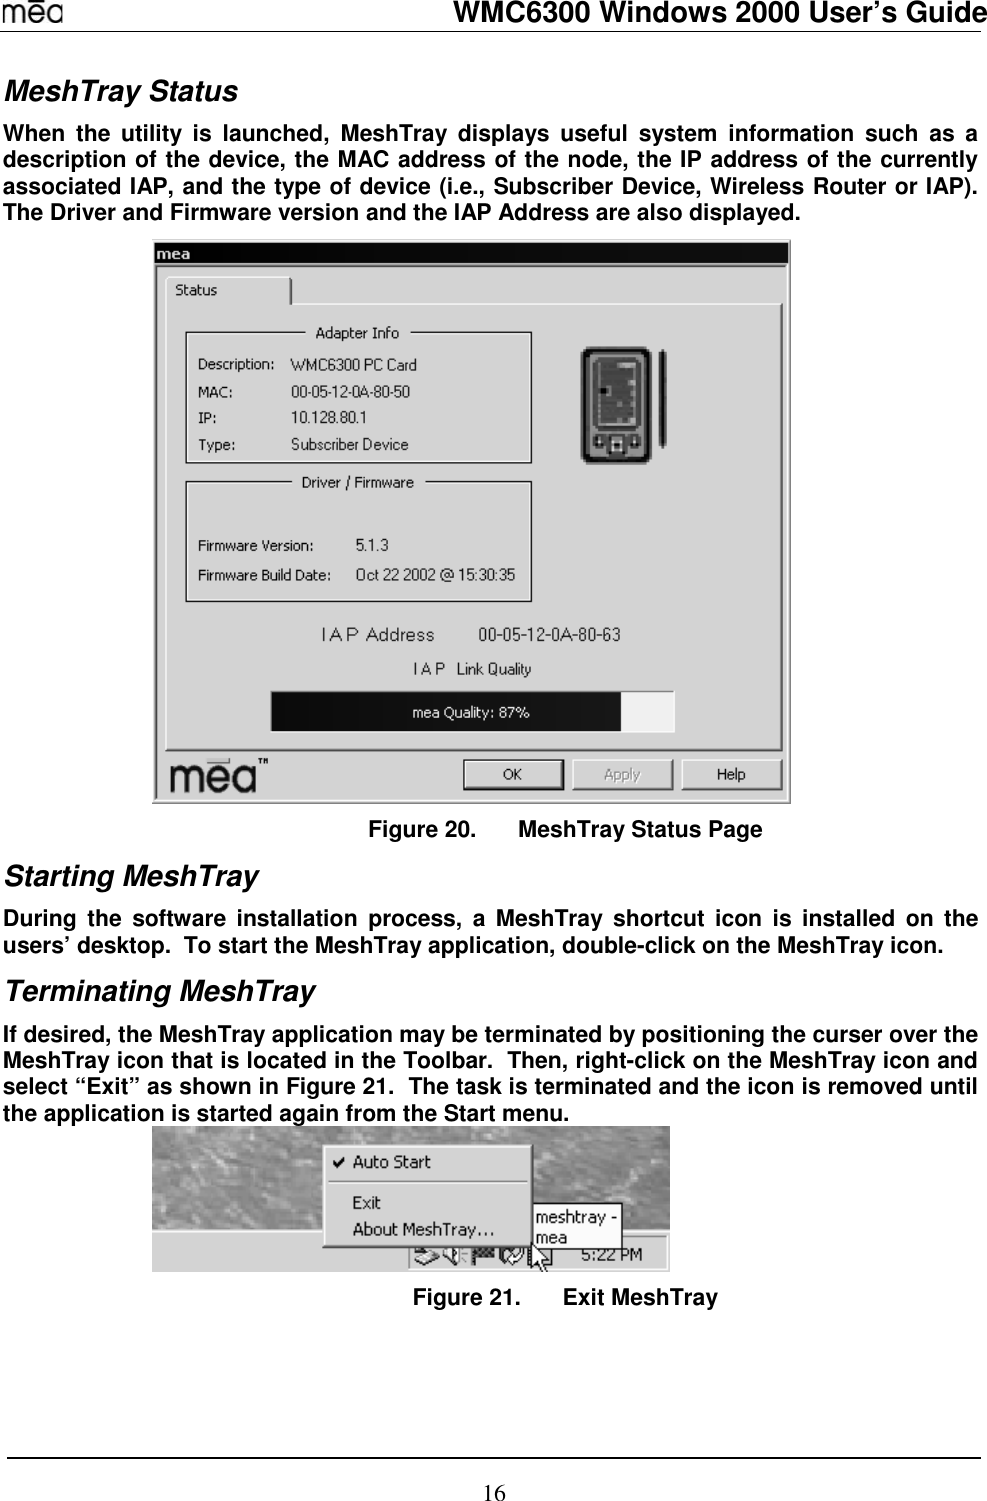   WMC6300 Windows 2000 User’s Guide 16 MeshTray Status When the utility is launched, MeshTray displays useful system information such as a description of the device, the MAC address of the node, the IP address of the currently associated IAP, and the type of device (i.e., Subscriber Device, Wireless Router or IAP).  The Driver and Firmware version and the IAP Address are also displayed.    Figure 20.  MeshTray Status Page Starting MeshTray During the software installation process, a MeshTray shortcut icon is installed on the users’ desktop.  To start the MeshTray application, double-click on the MeshTray icon. Terminating MeshTray If desired, the MeshTray application may be terminated by positioning the curser over the MeshTray icon that is located in the Toolbar.  Then, right-click on the MeshTray icon and select “Exit” as shown in Figure 21.  The task is terminated and the icon is removed until the application is started again from the Start menu.  Figure 21.  Exit MeshTray 